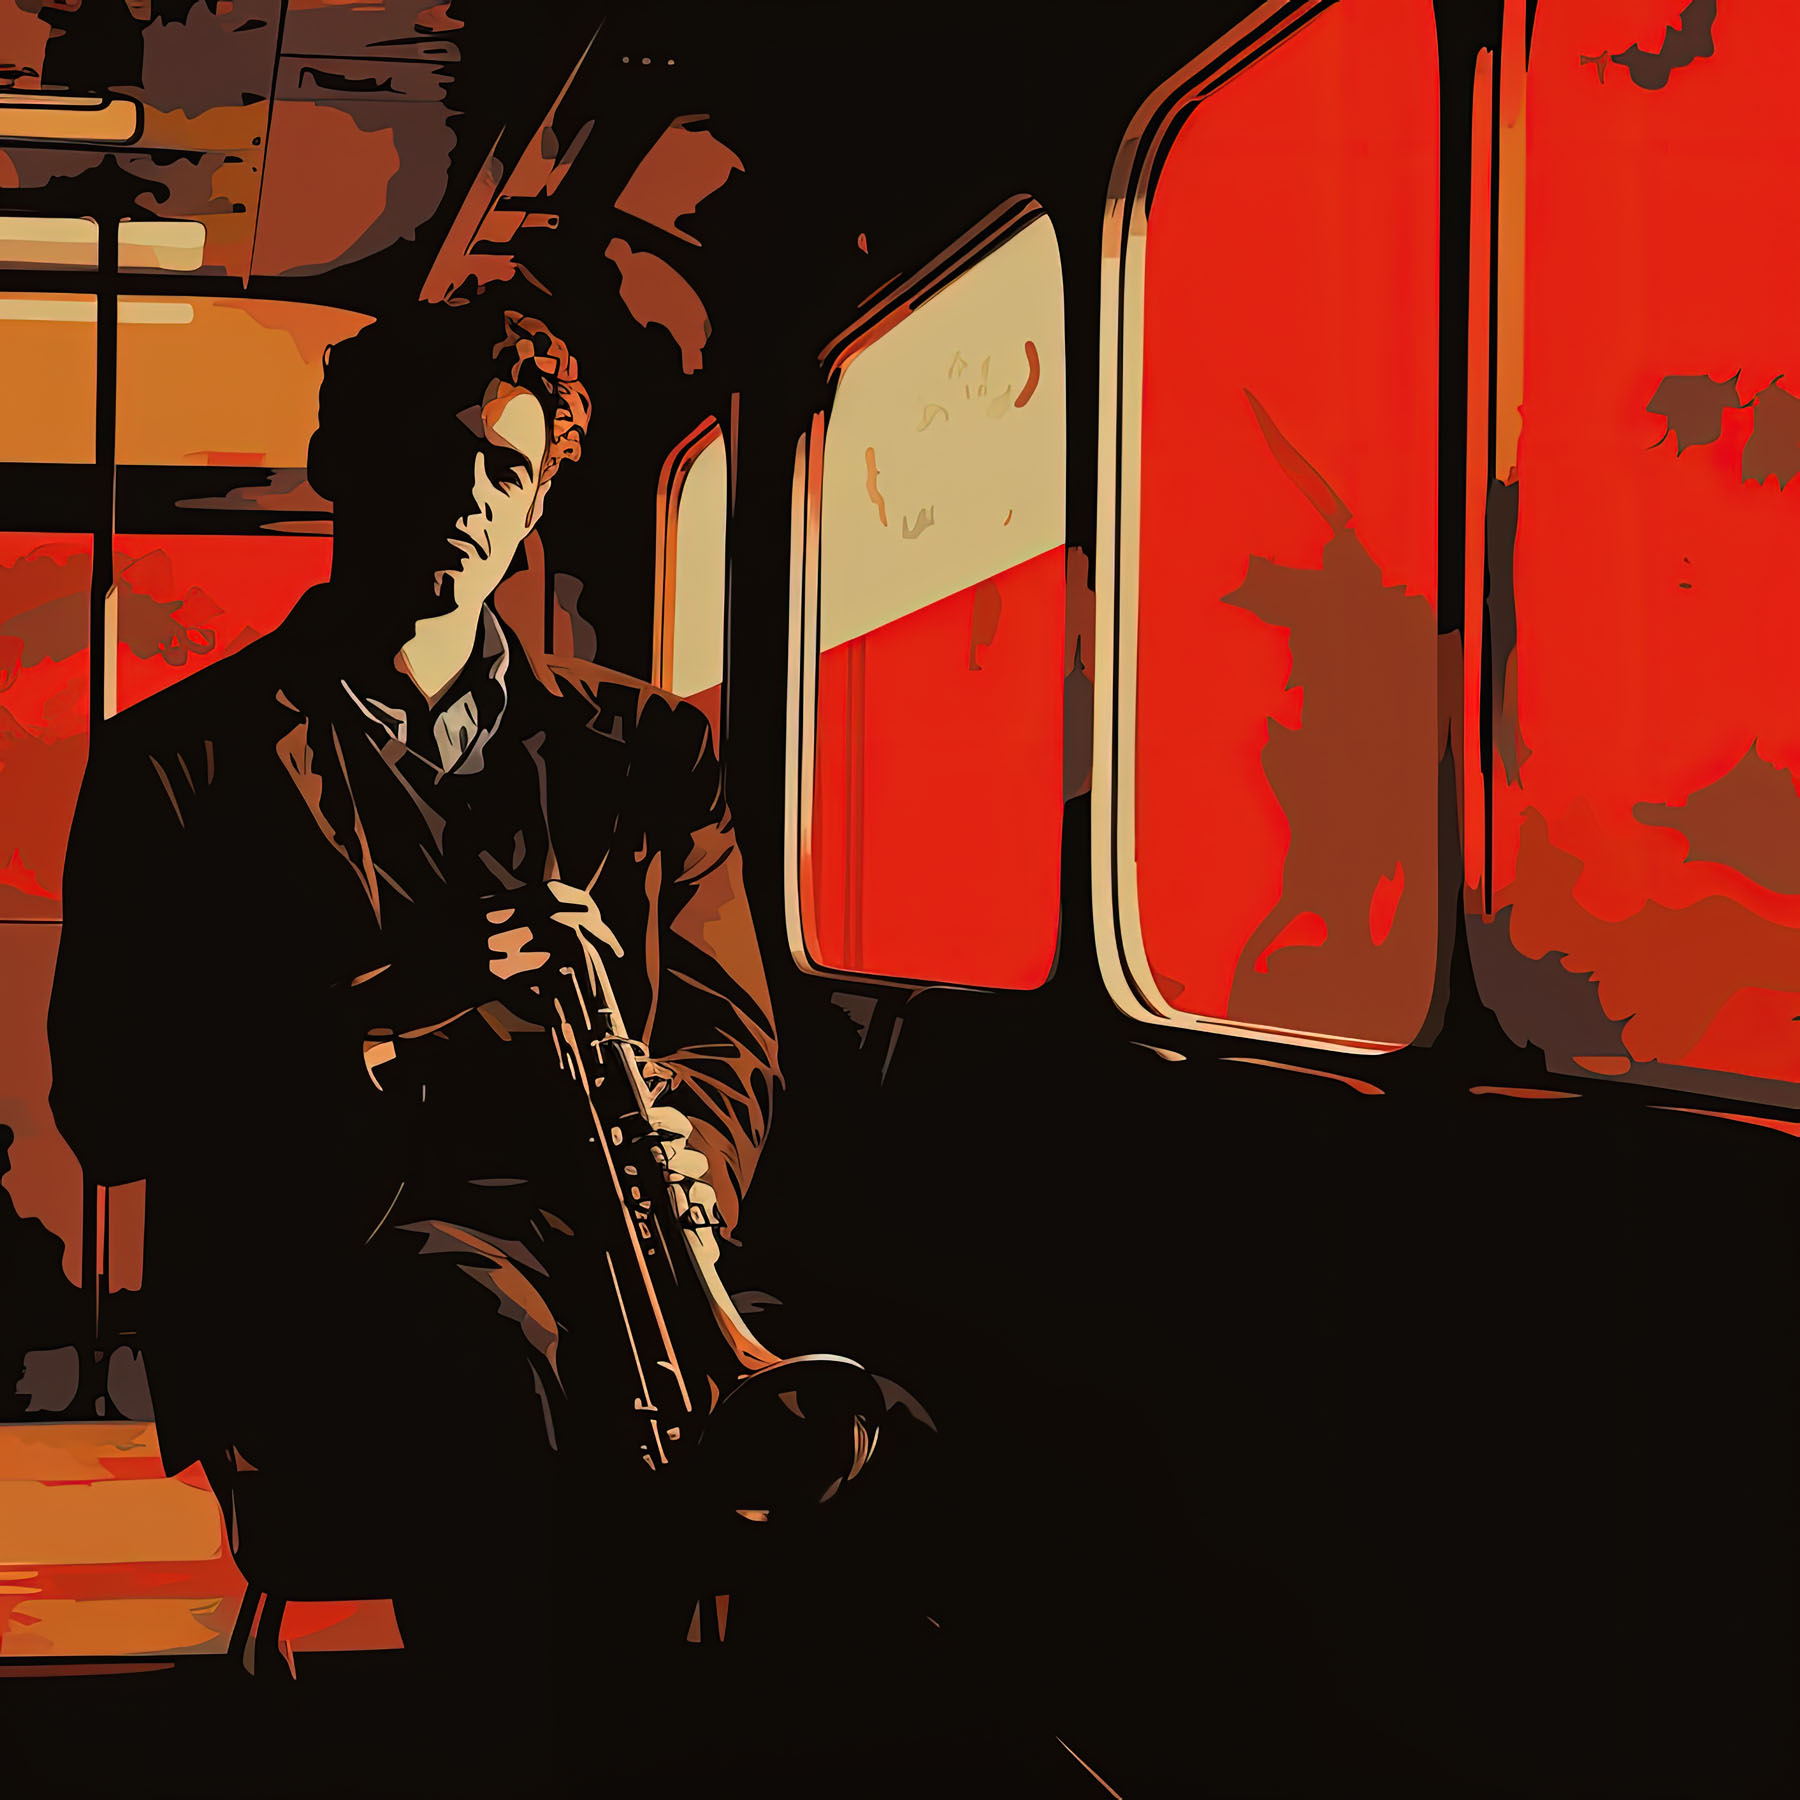 Dramatic comic book inked looking illustration in reds and oranges of a man sitting alone in a bus with a trumpet in his lap.